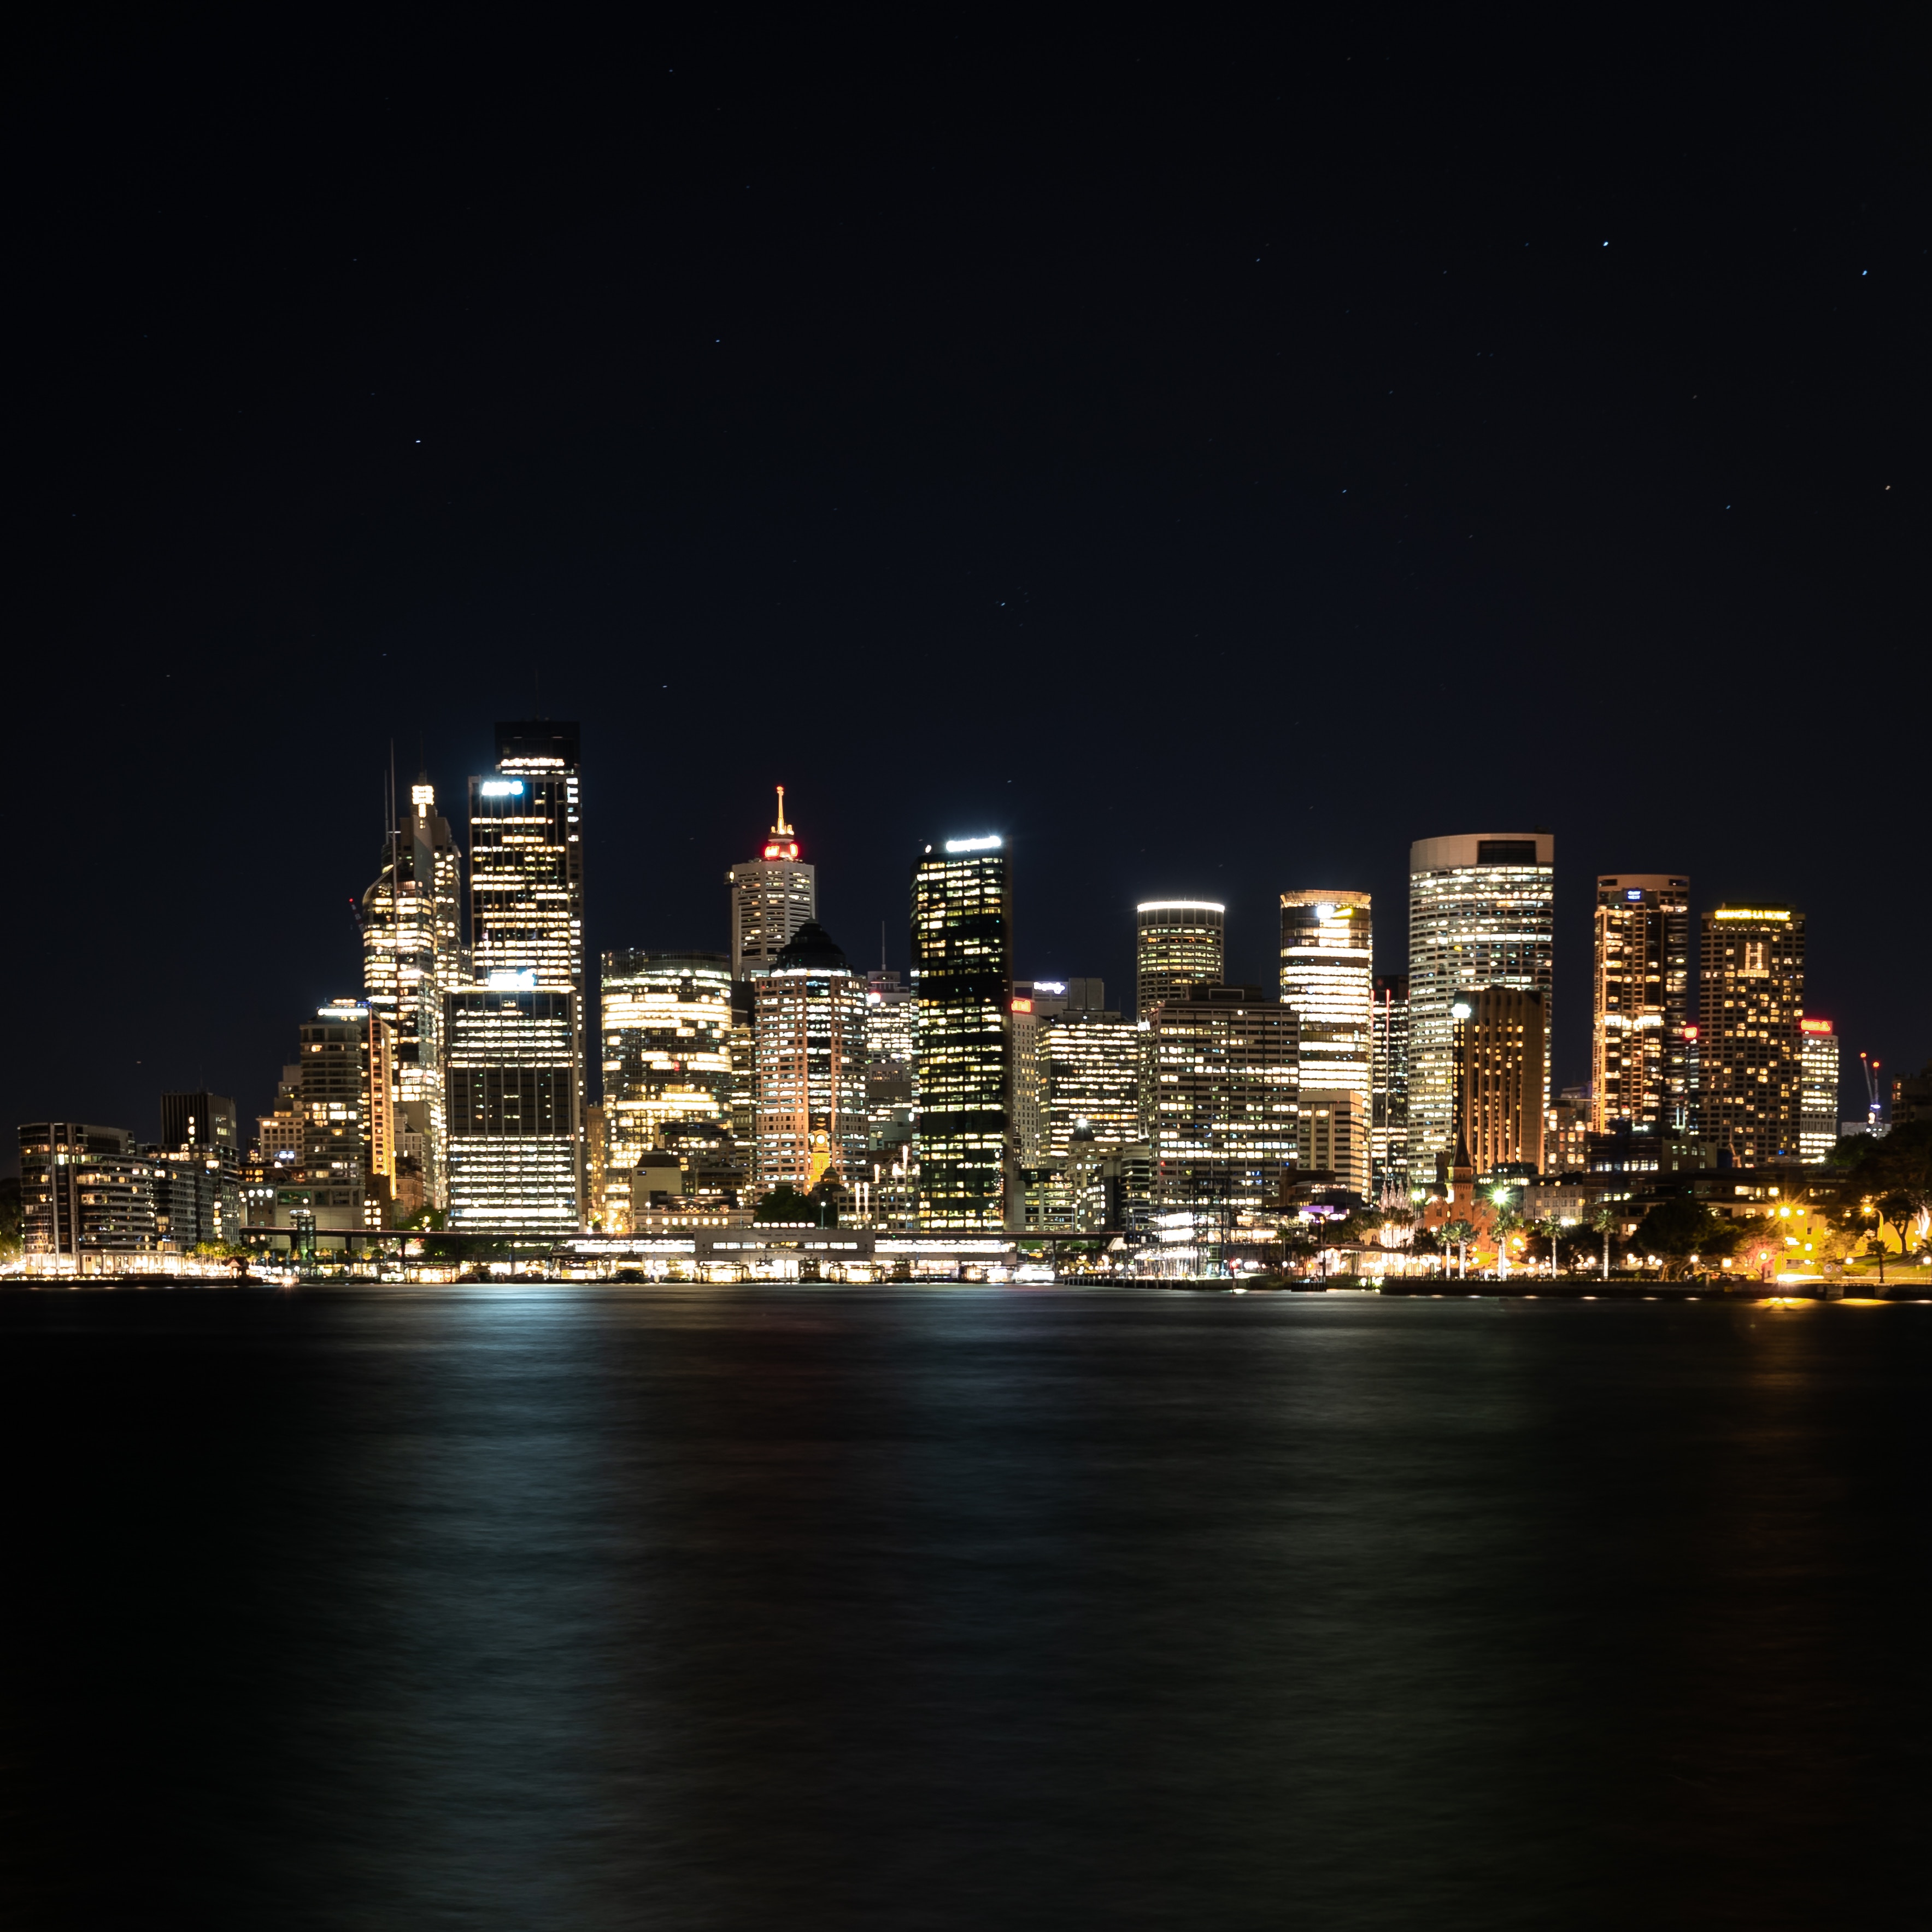 86812 download wallpaper cities, sydney, shore, bank, night city, city lights, panorama, australia screensavers and pictures for free